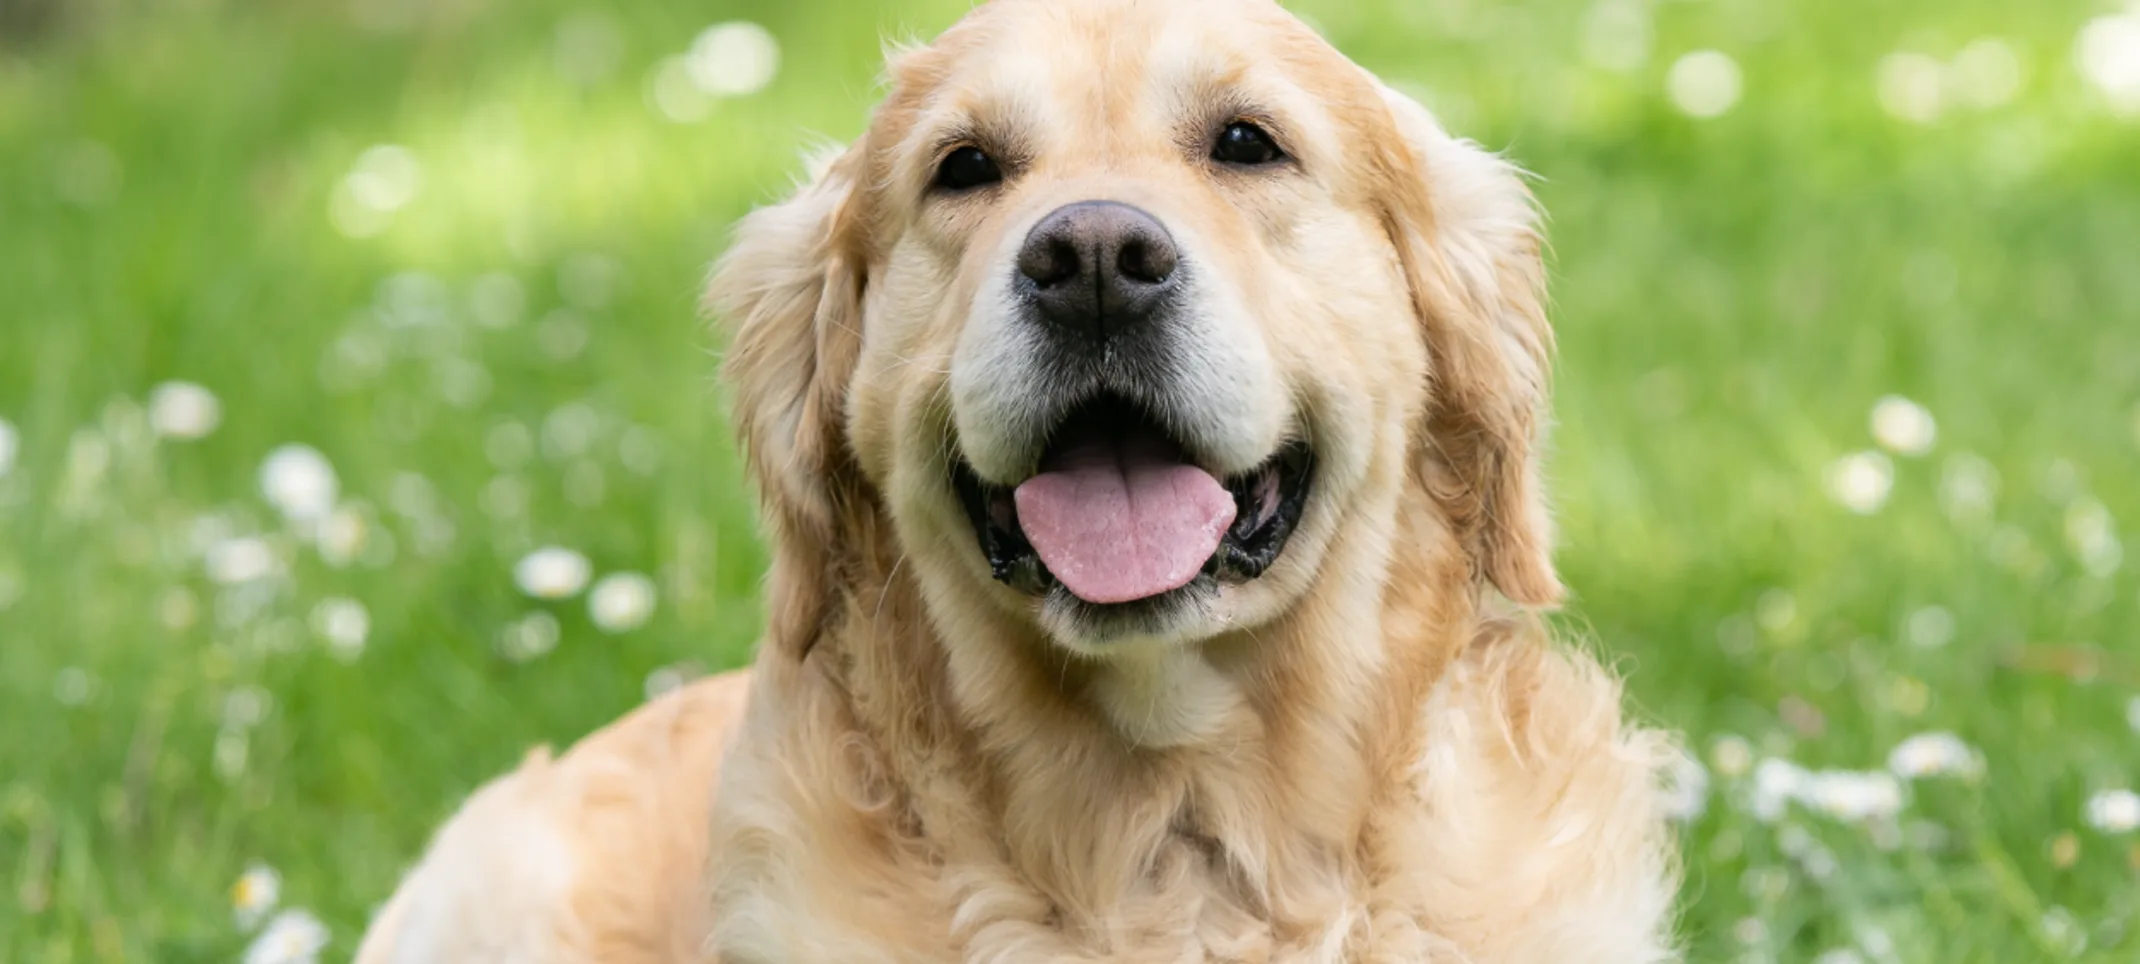 large dog smiling in grass